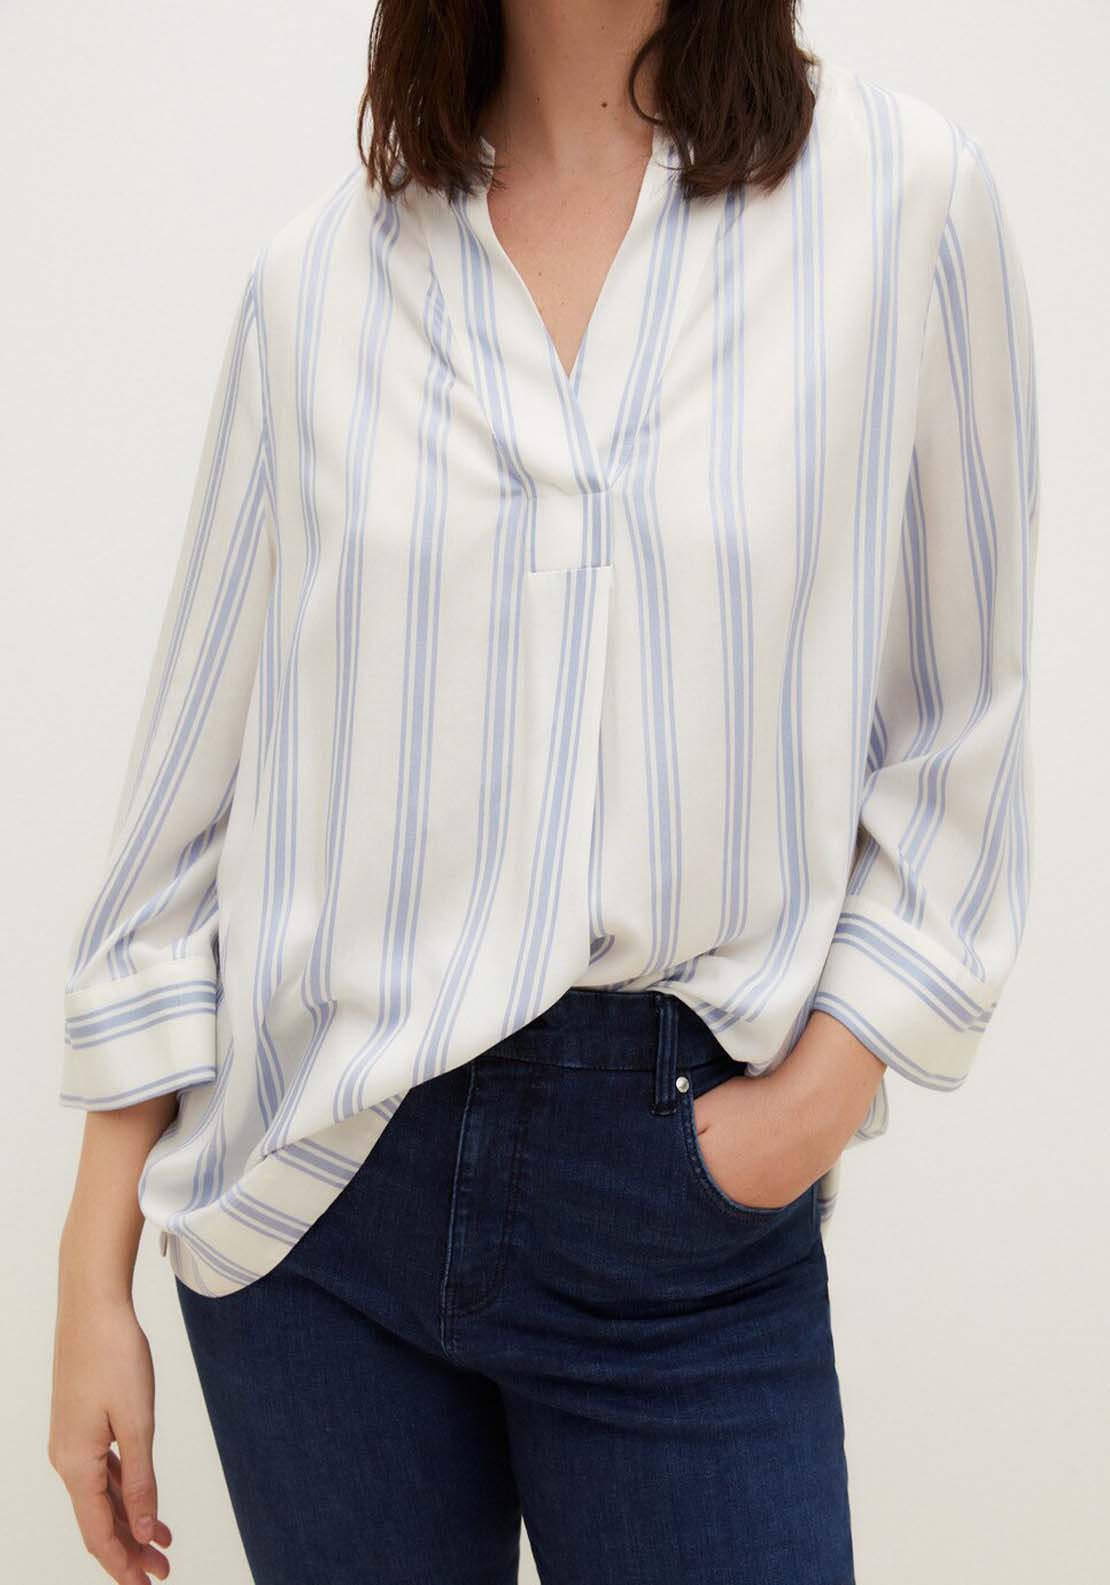 Couchel Stripes Long Sleeve Blouse 2 Shaws Department Stores